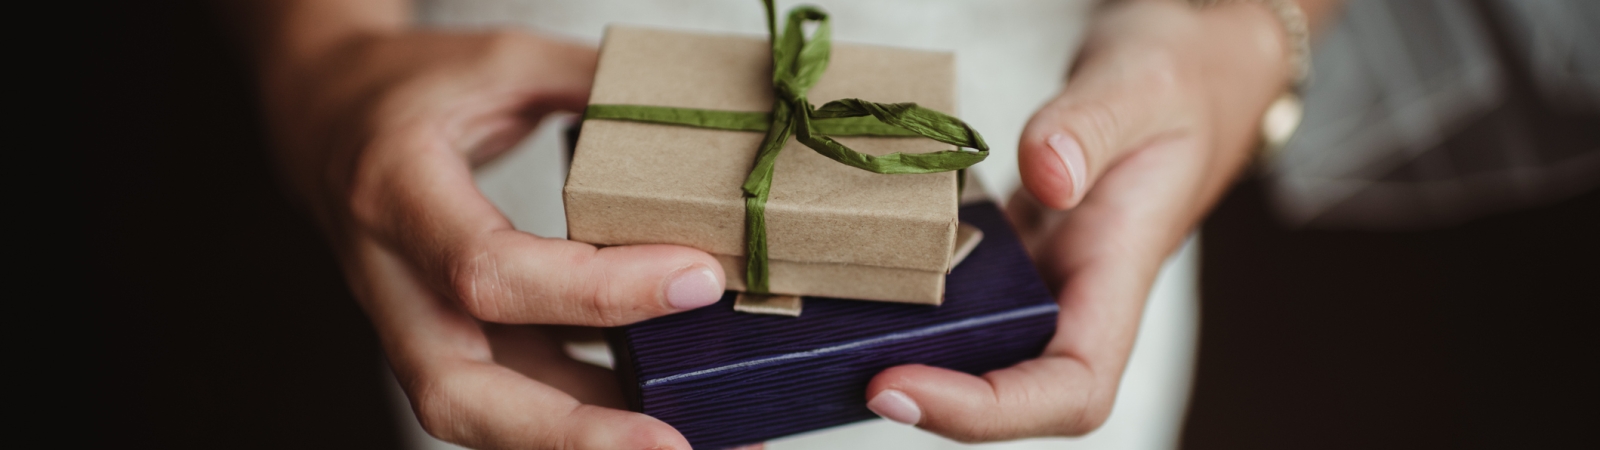 a person holding two small gift boxes. one is brown with a green ribbon and the other navy blue.